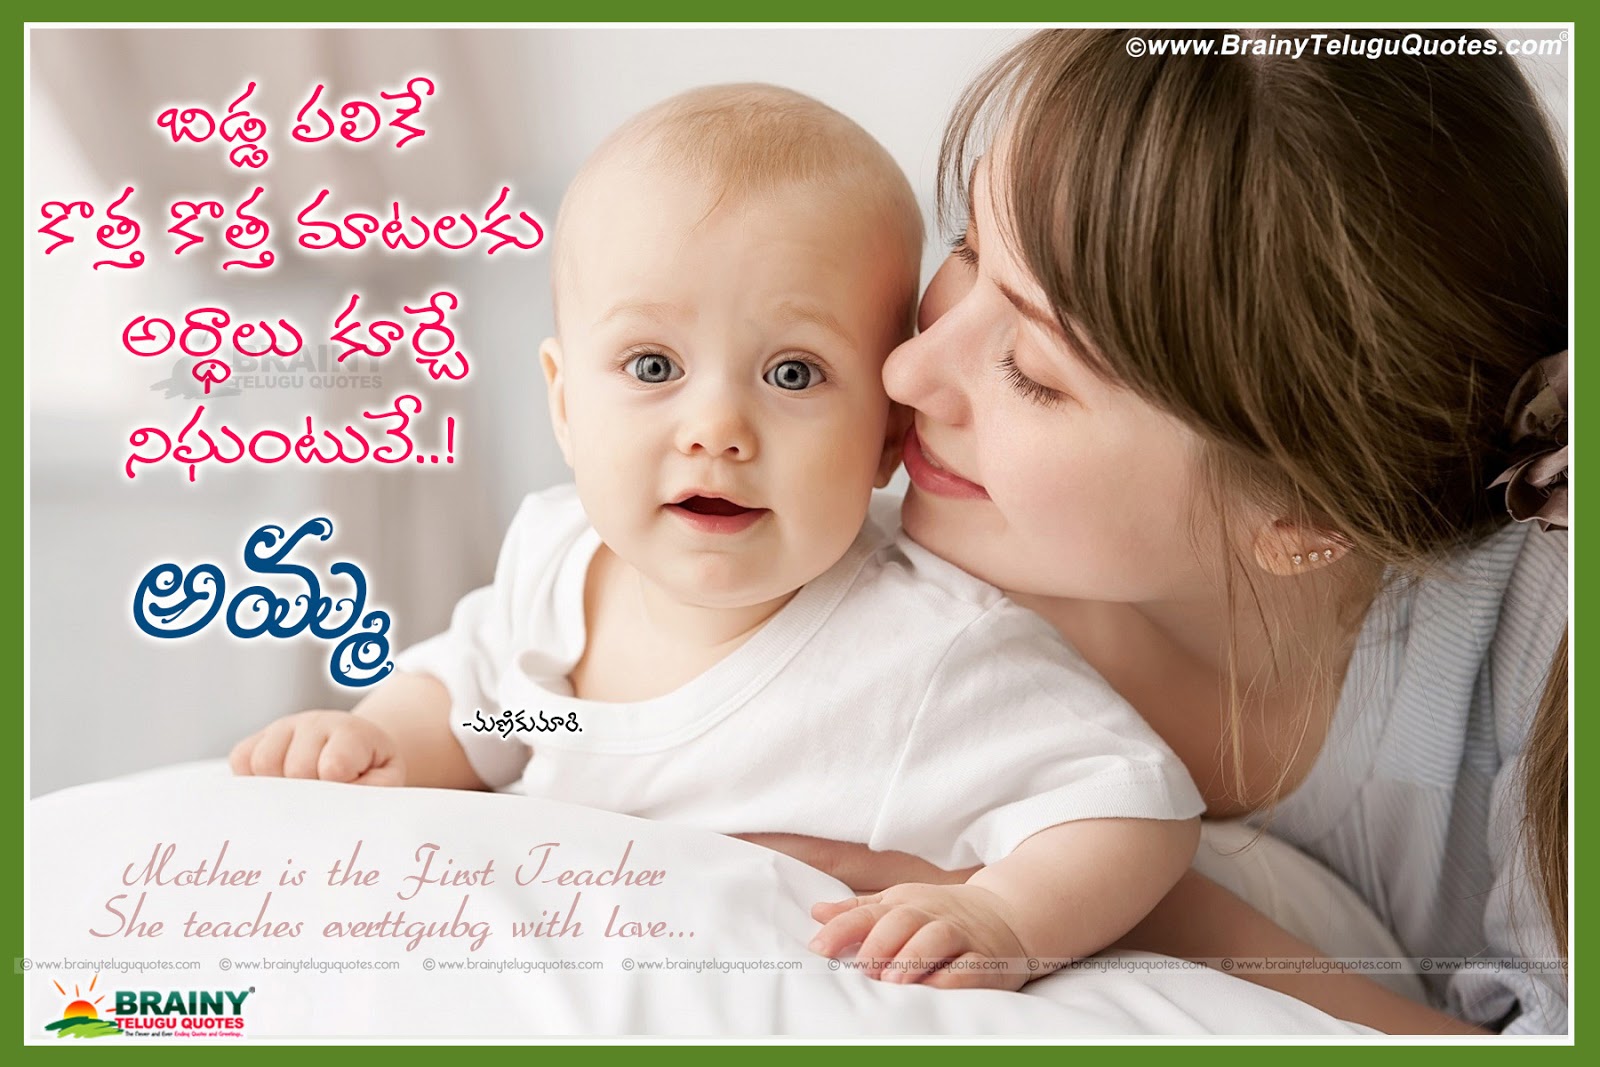 Telugu Heart Touching Mother Love Quotes images